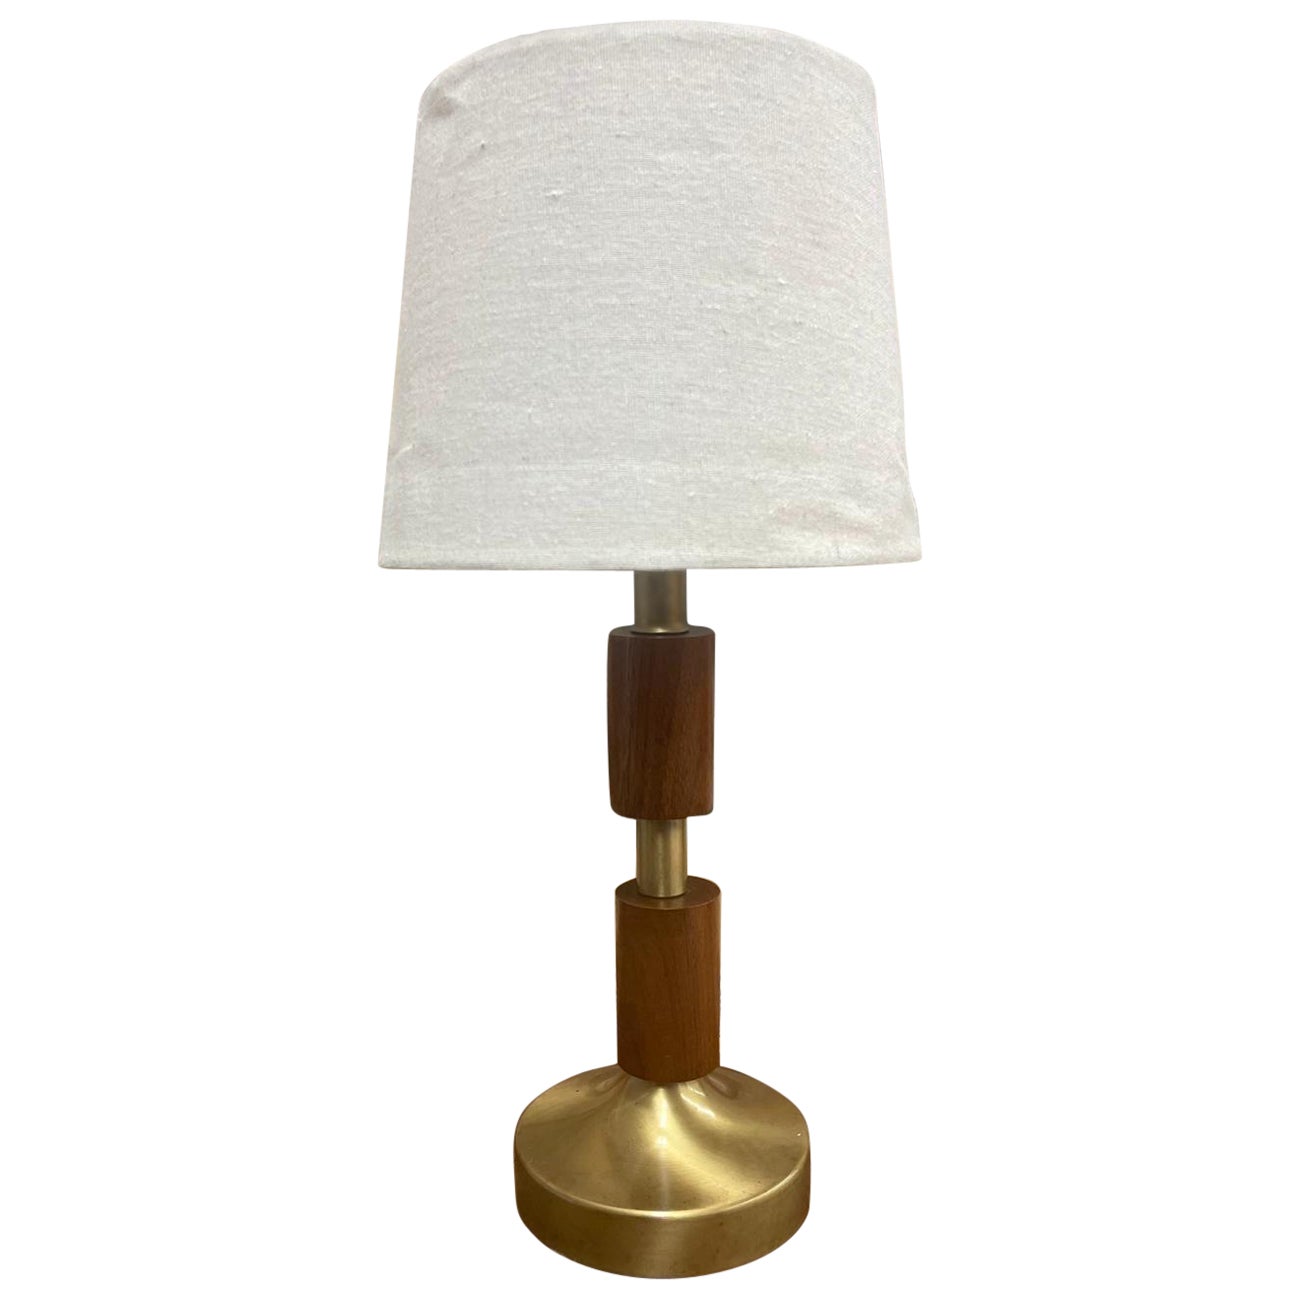 Vintage Brass Toned Mid Century Modern Table Lamp. For Sale